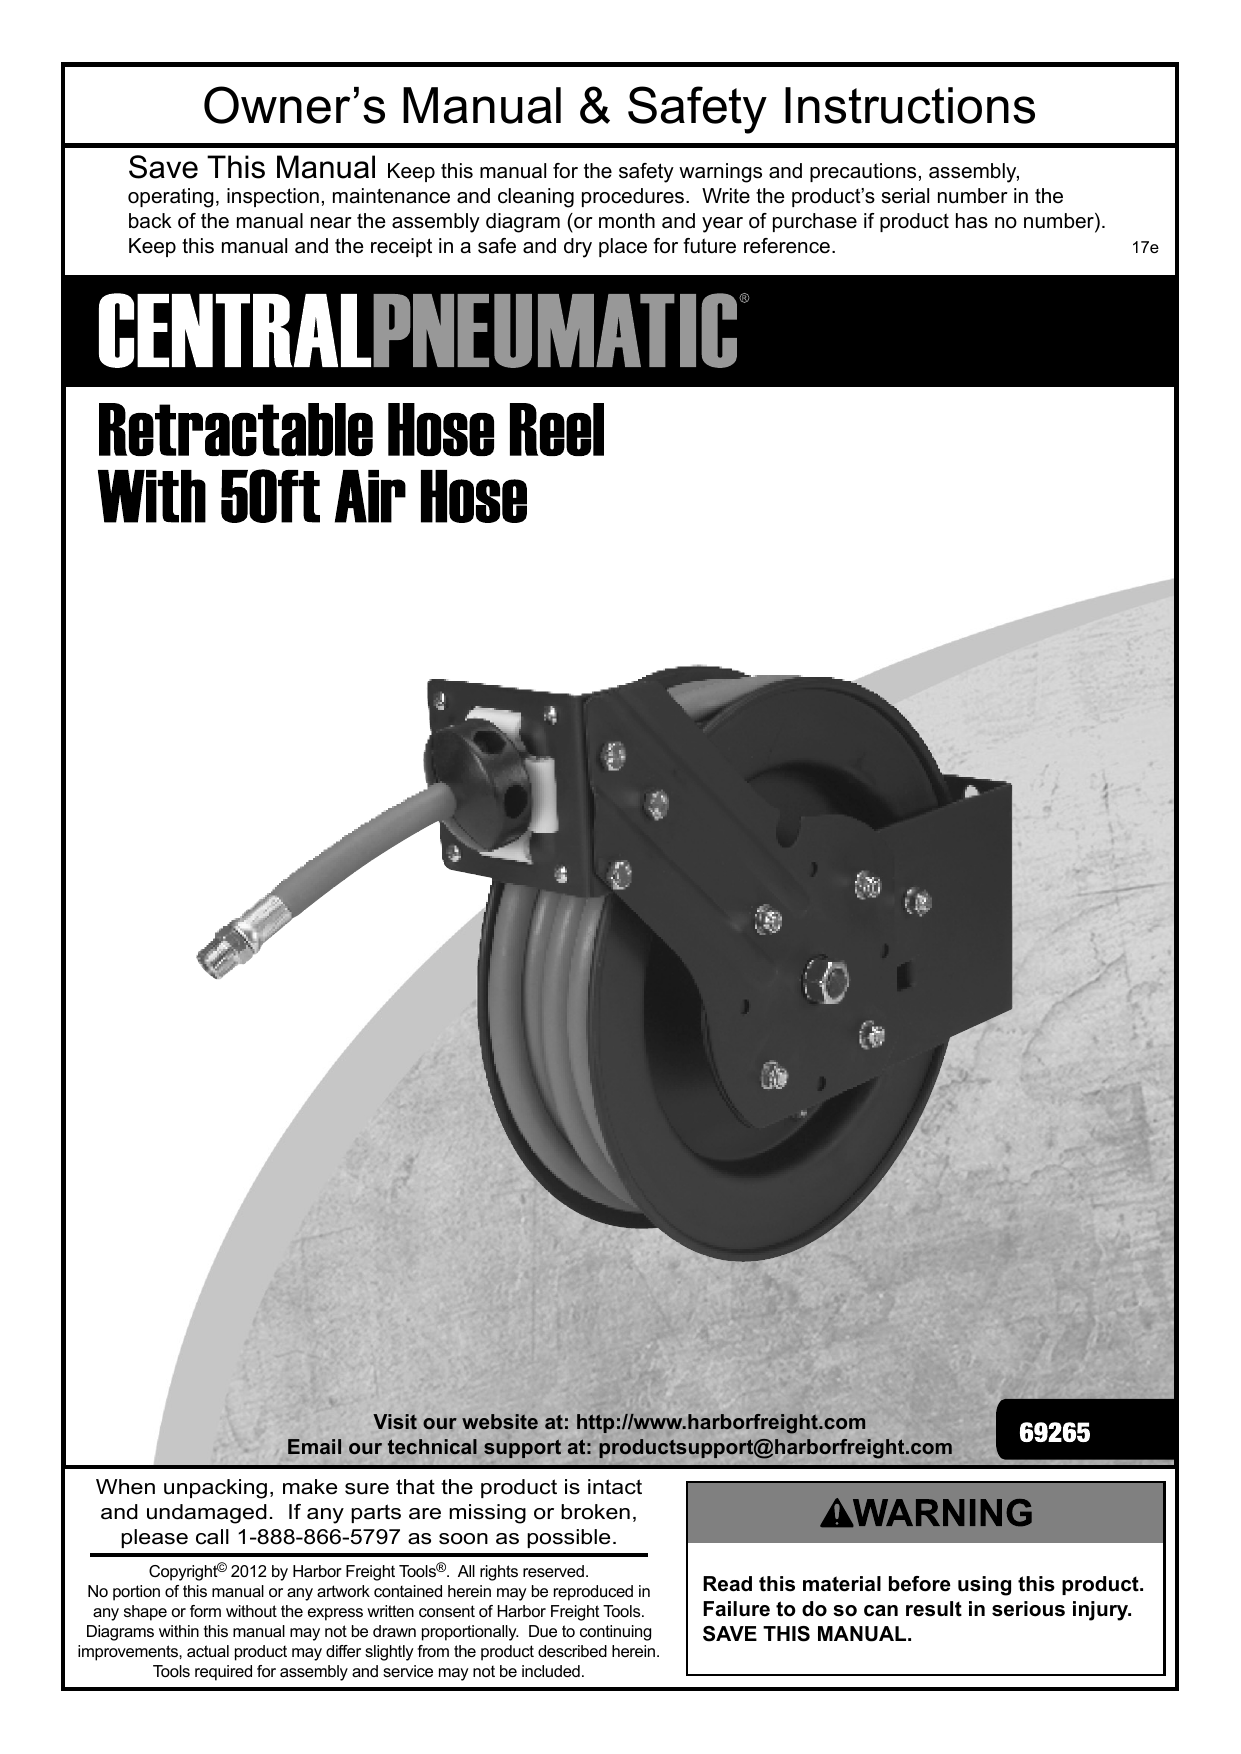 Central Pneumatic 69265 3/8 in. x 50 ft. Retractable Hose Reel